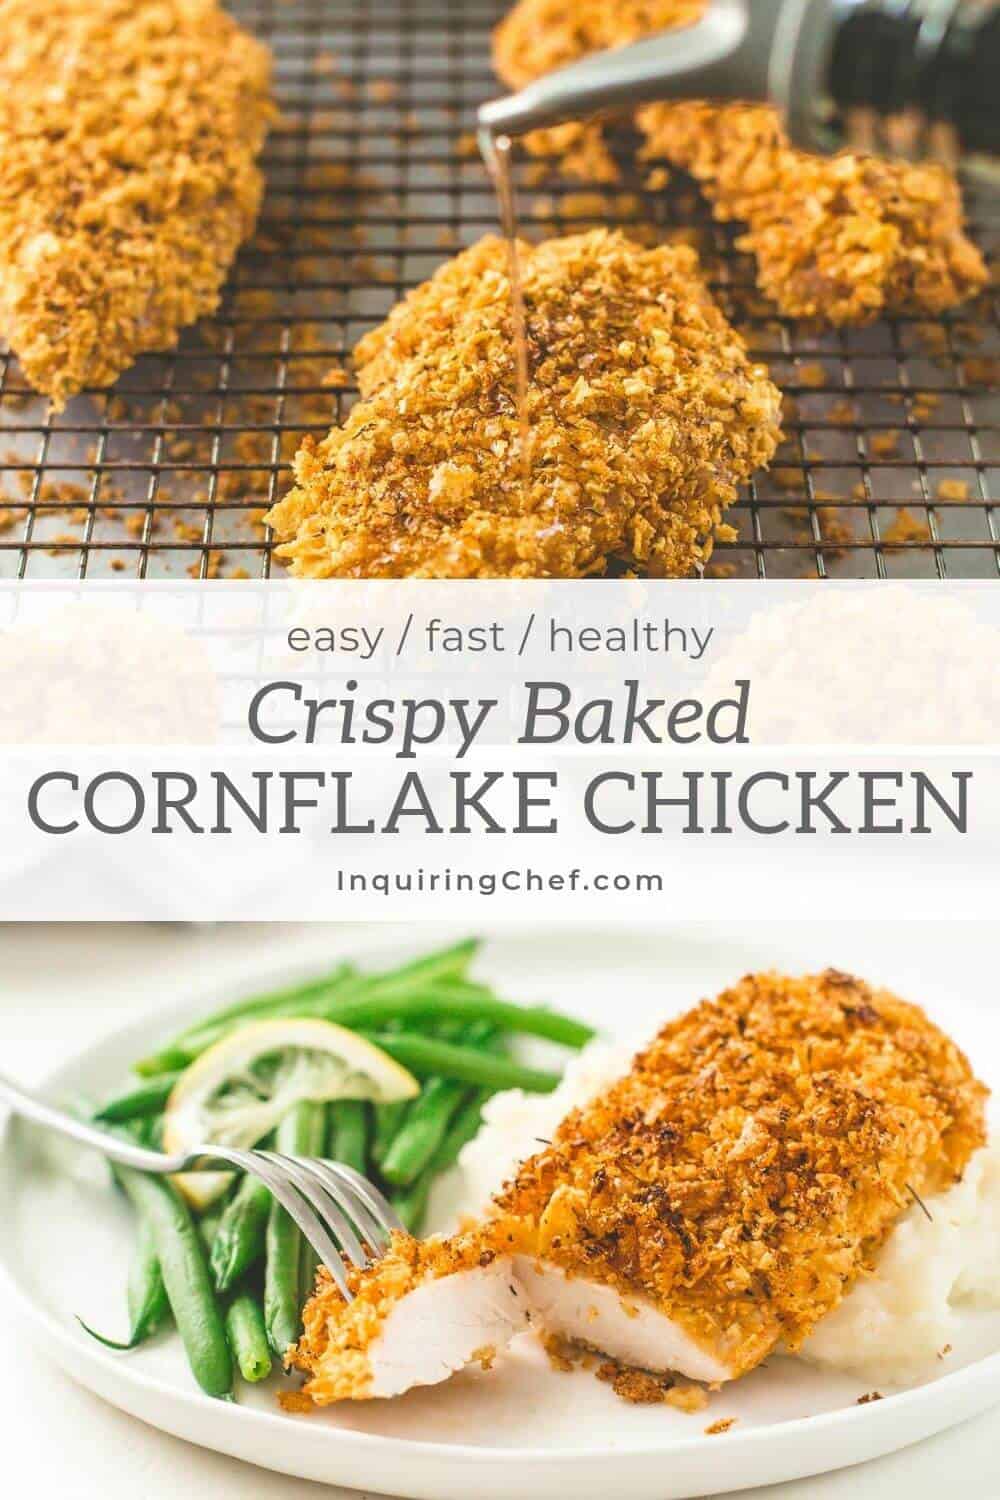 Crispy Baked Cornflake Chicken on a plate and on a baking sheet